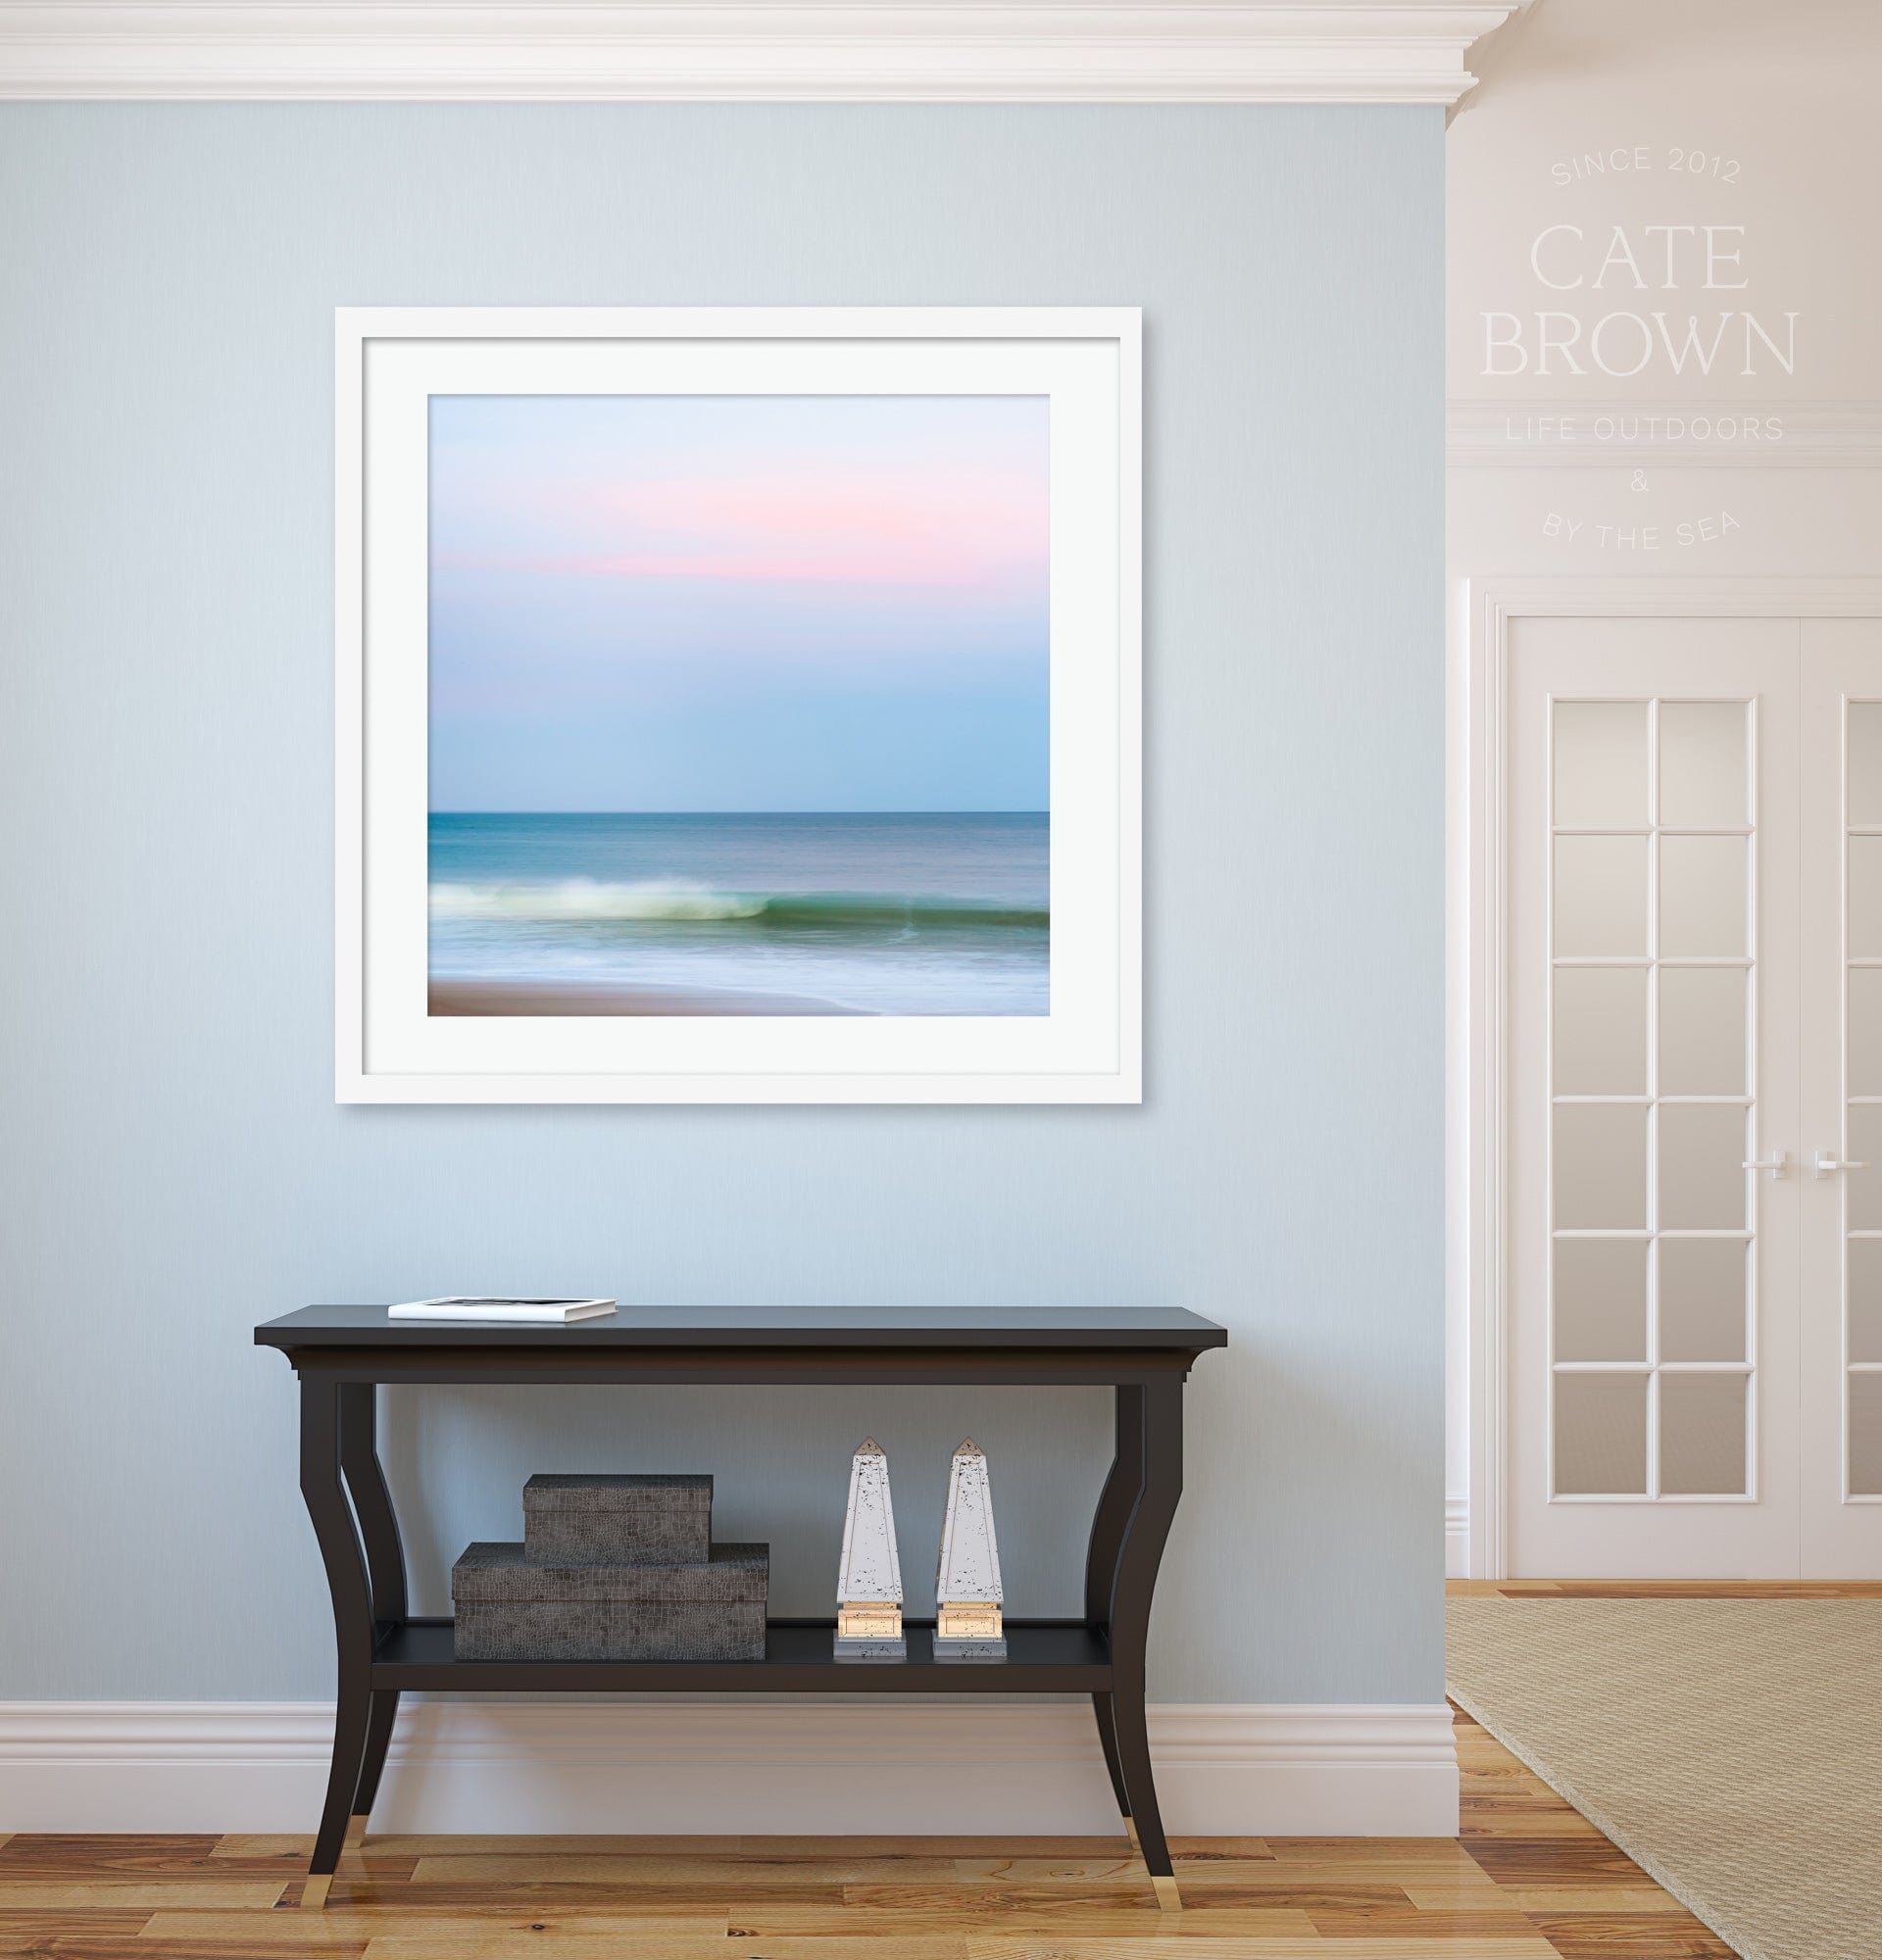 Cate Brown Photo Fine Art Print / 8"x8" / None (Print Only) Qeba #2  //  Abstract Photography Made to Order Ocean Fine Art